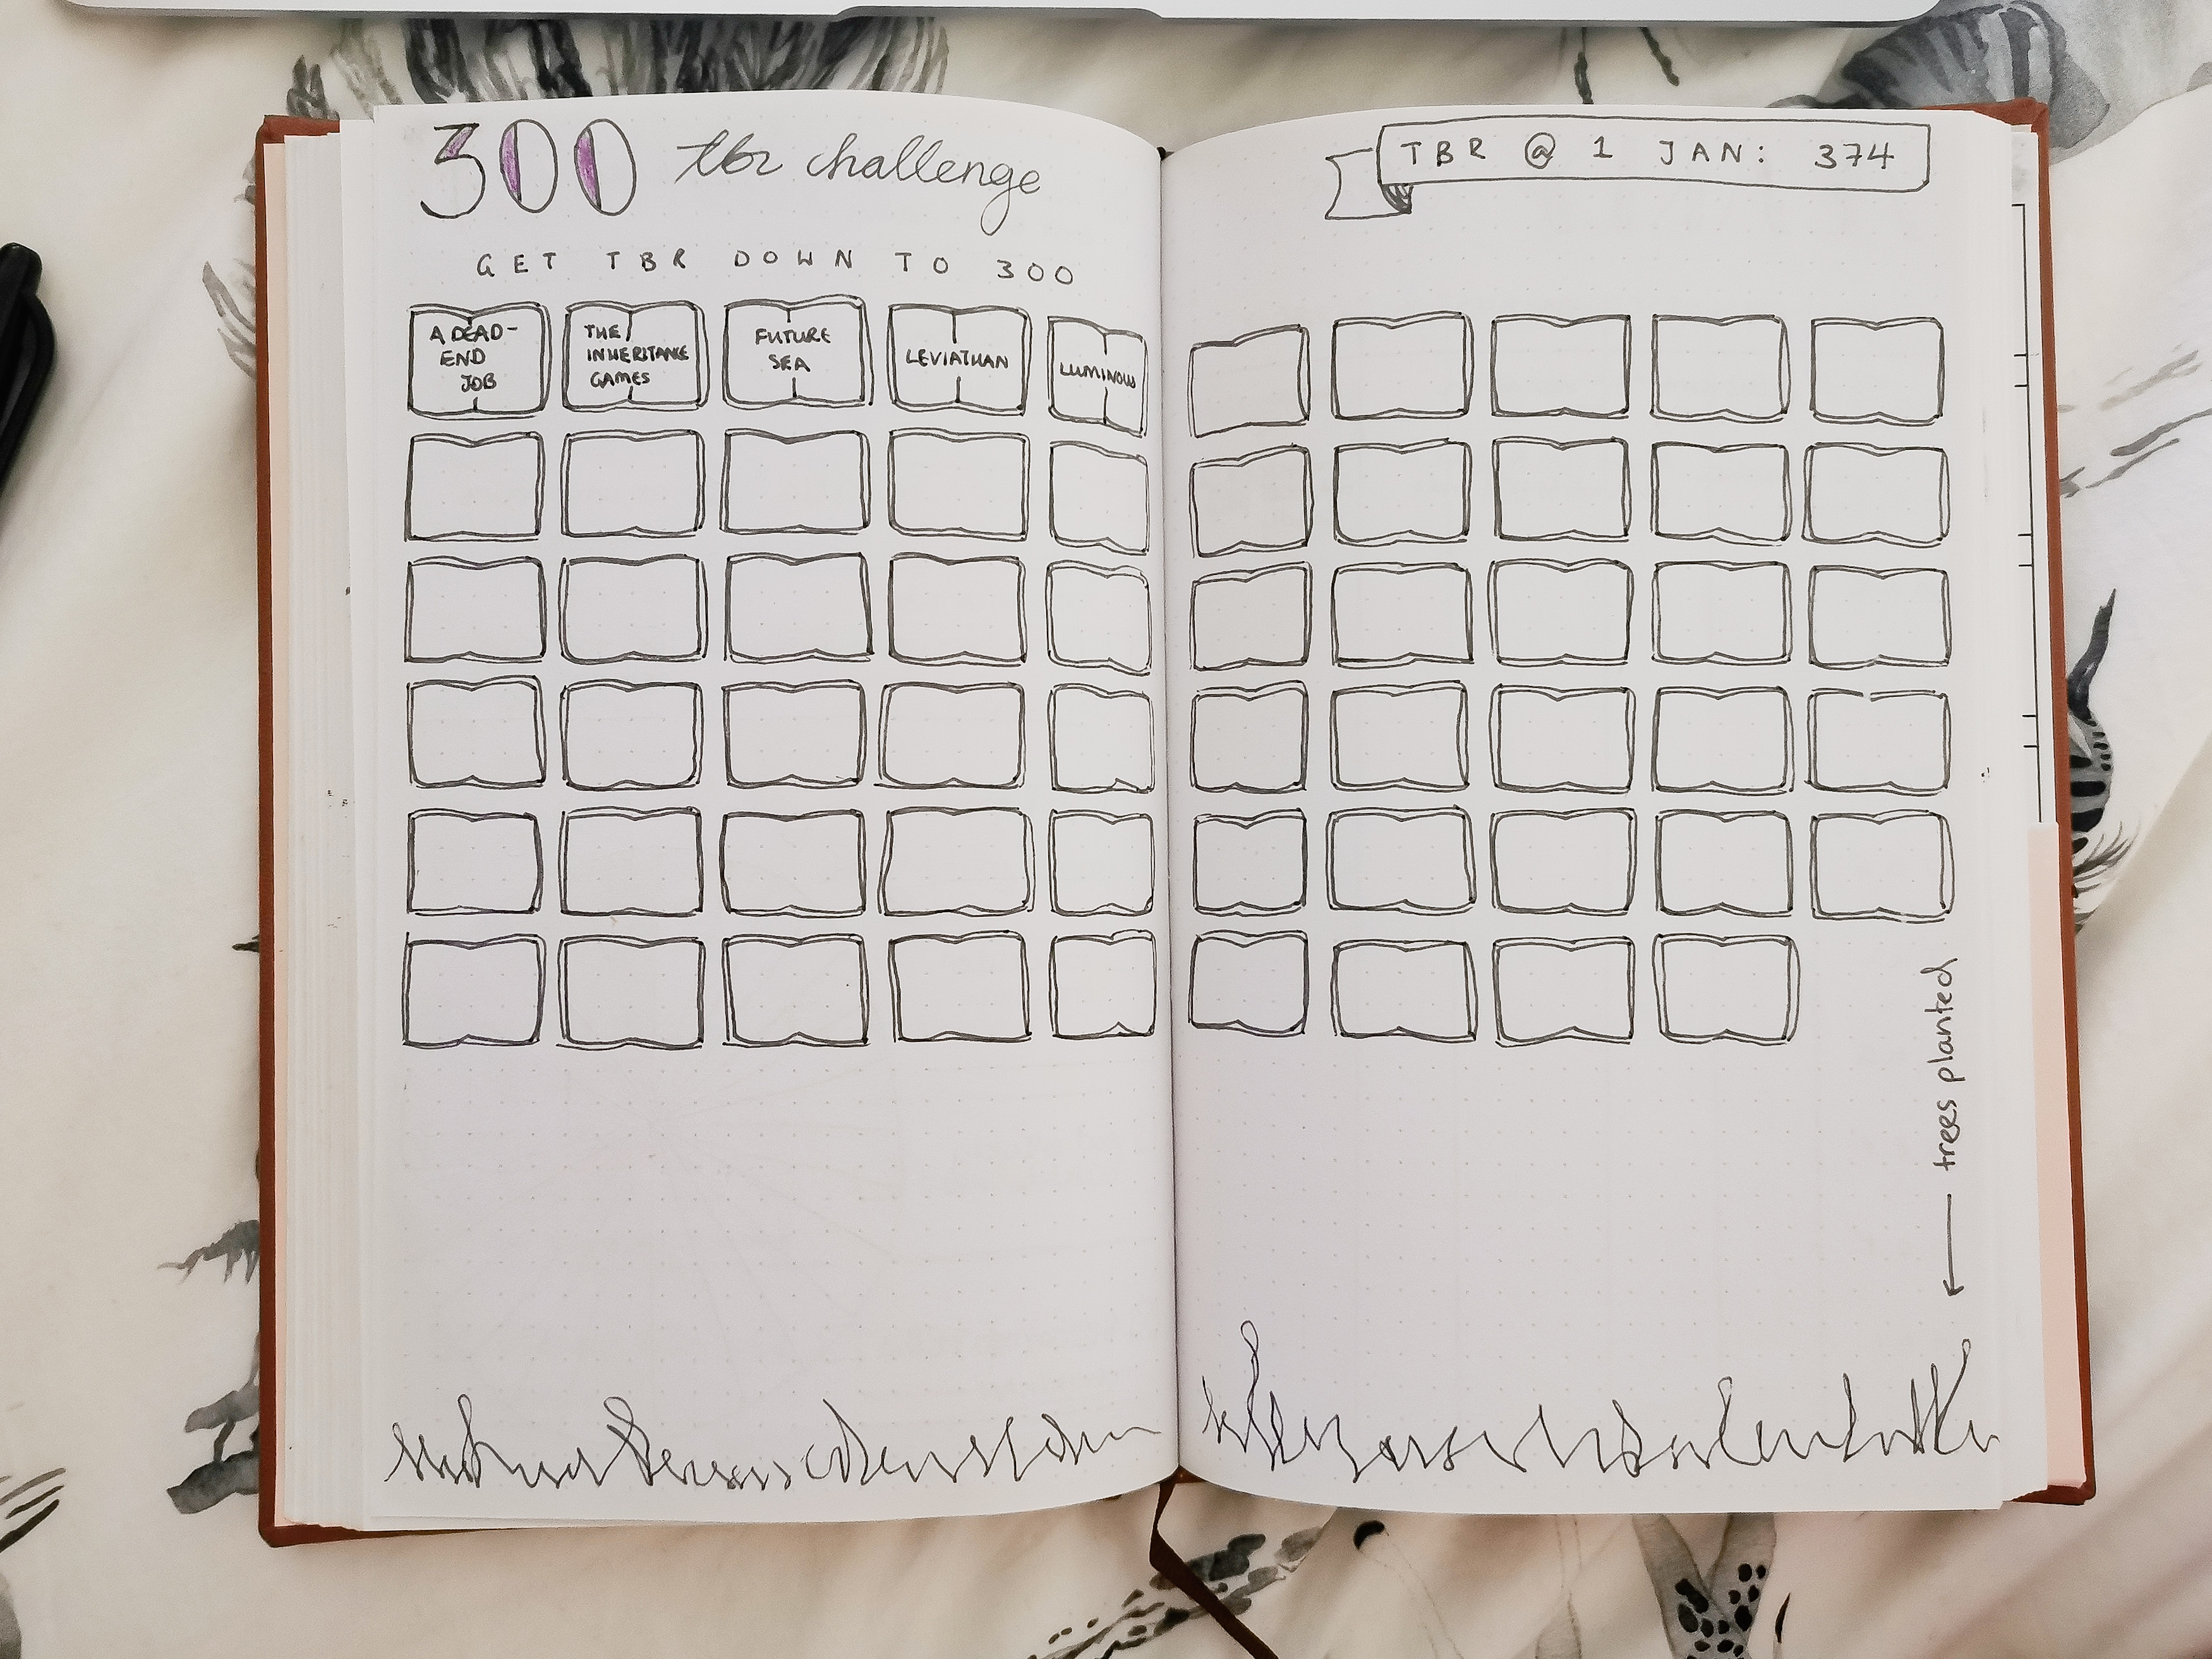 How To Track Your Reading With A Bullet Journal  Trackers, Goals, Book  Reviews + MORE 